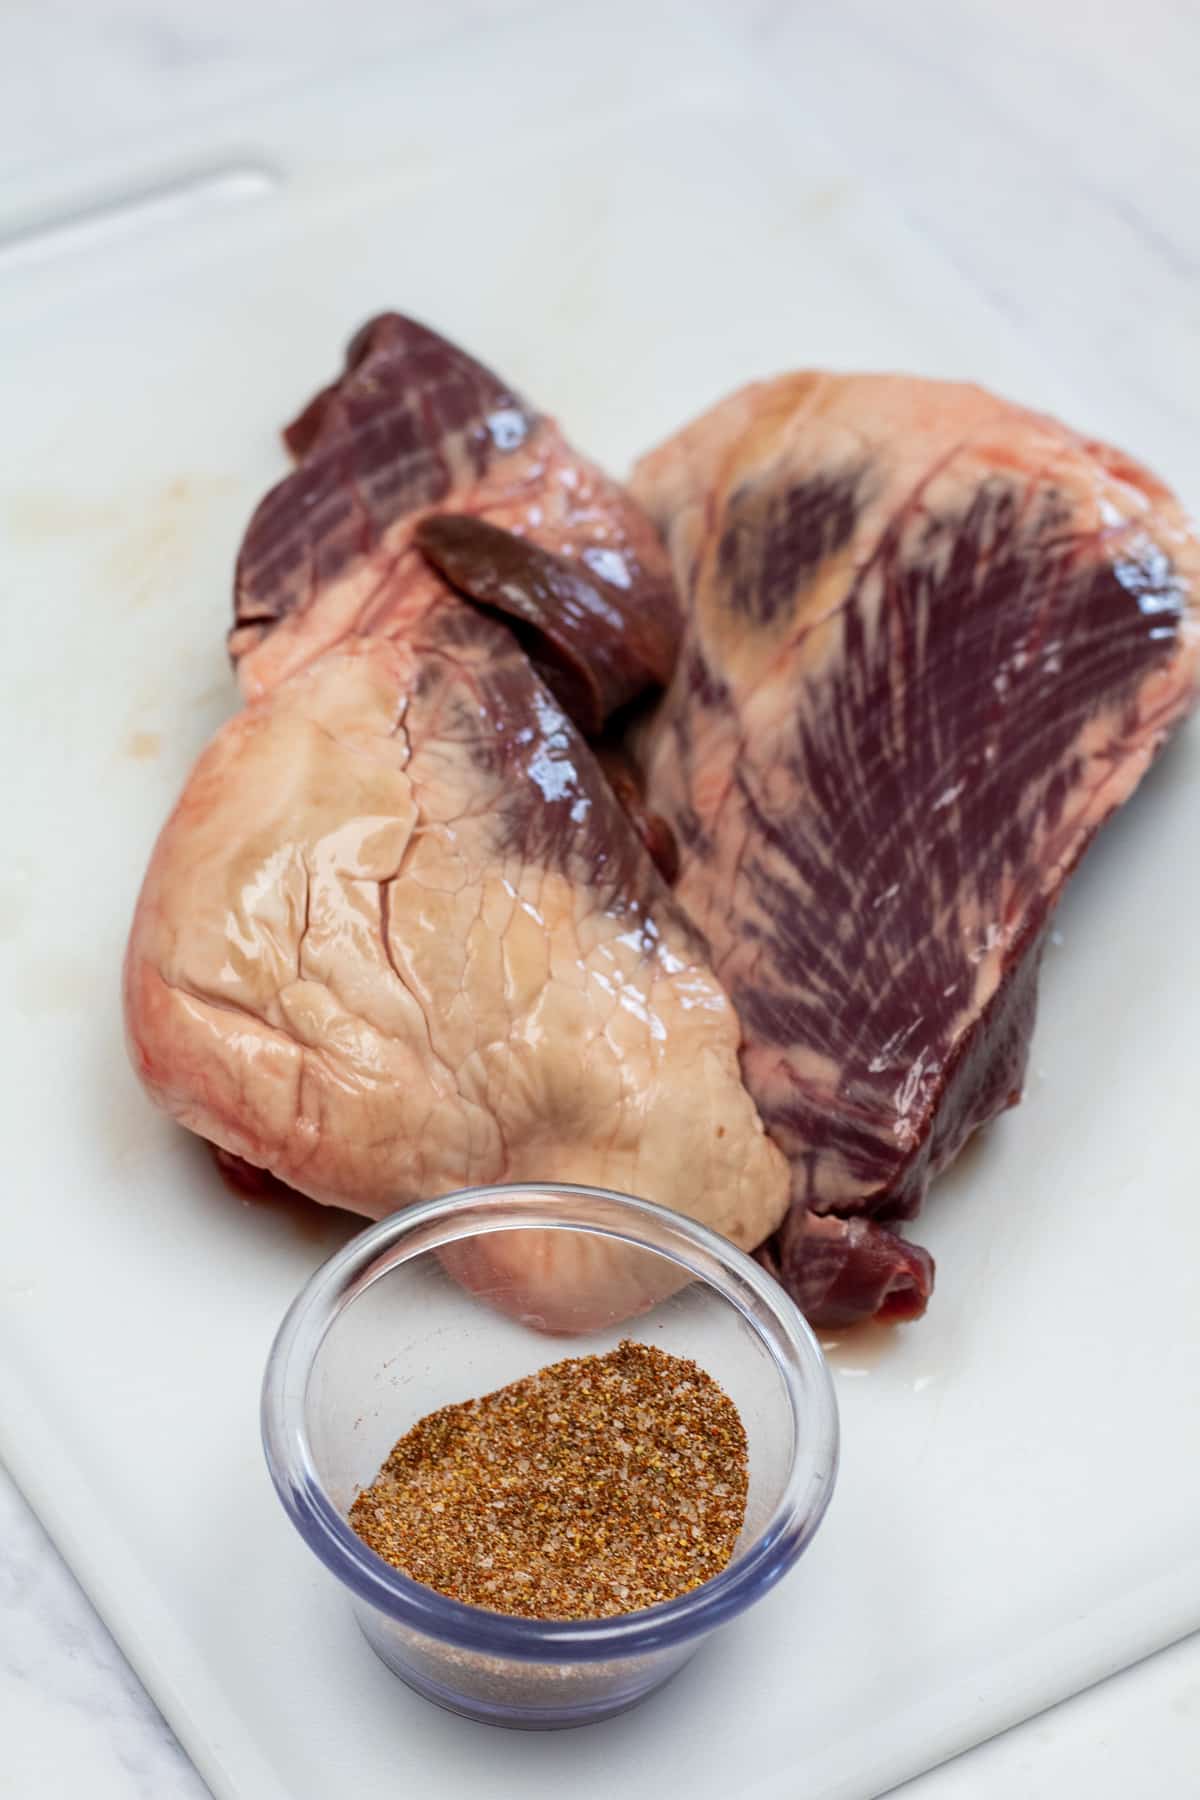 Tall image showing ingredients for beef heart steak.